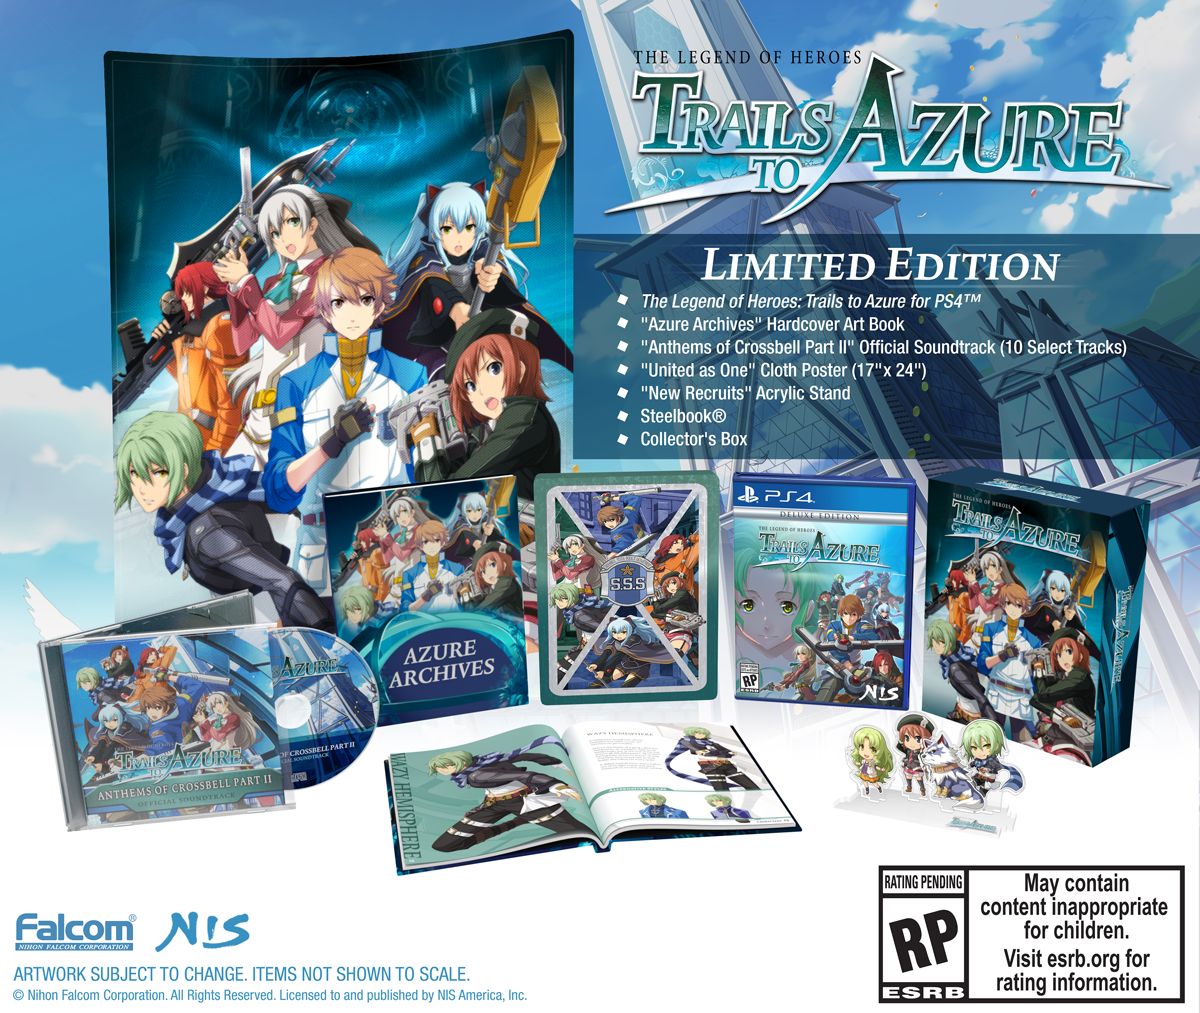 The Legend of Heroes Trails to Azure Lmited Edition